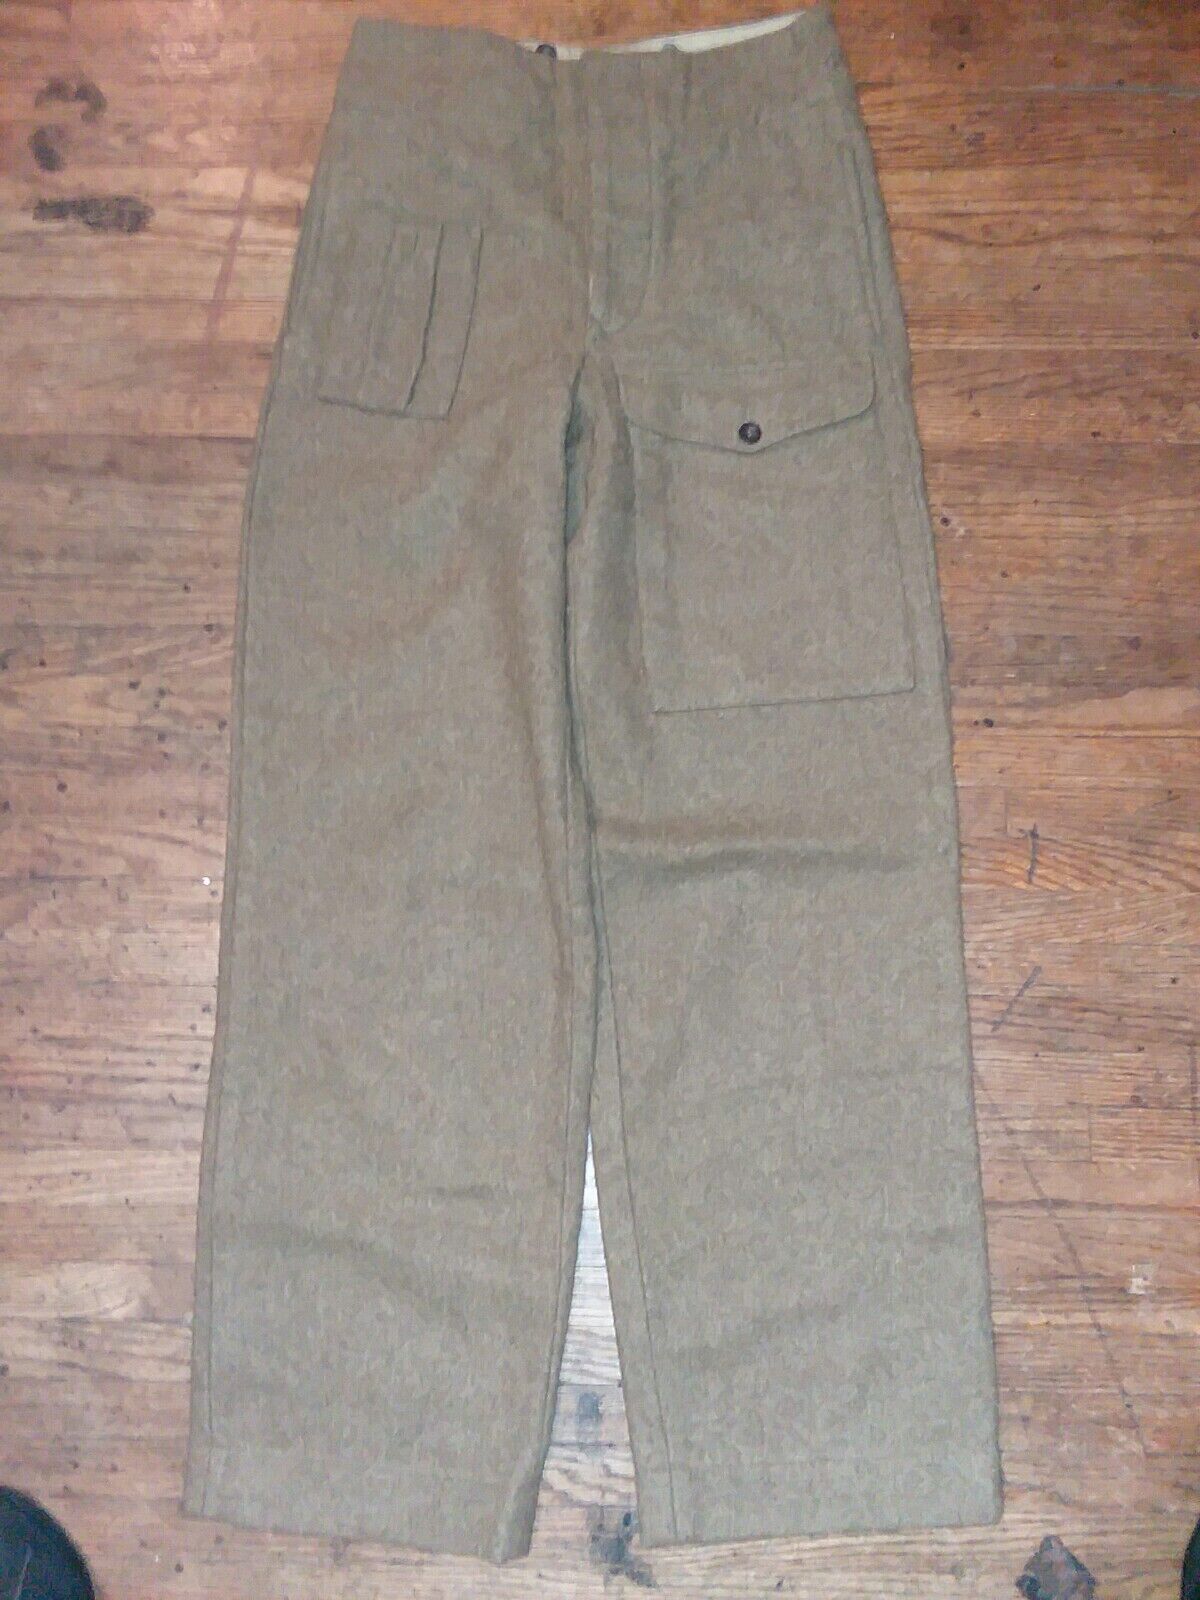 British Army reproduction p40 trousers 2